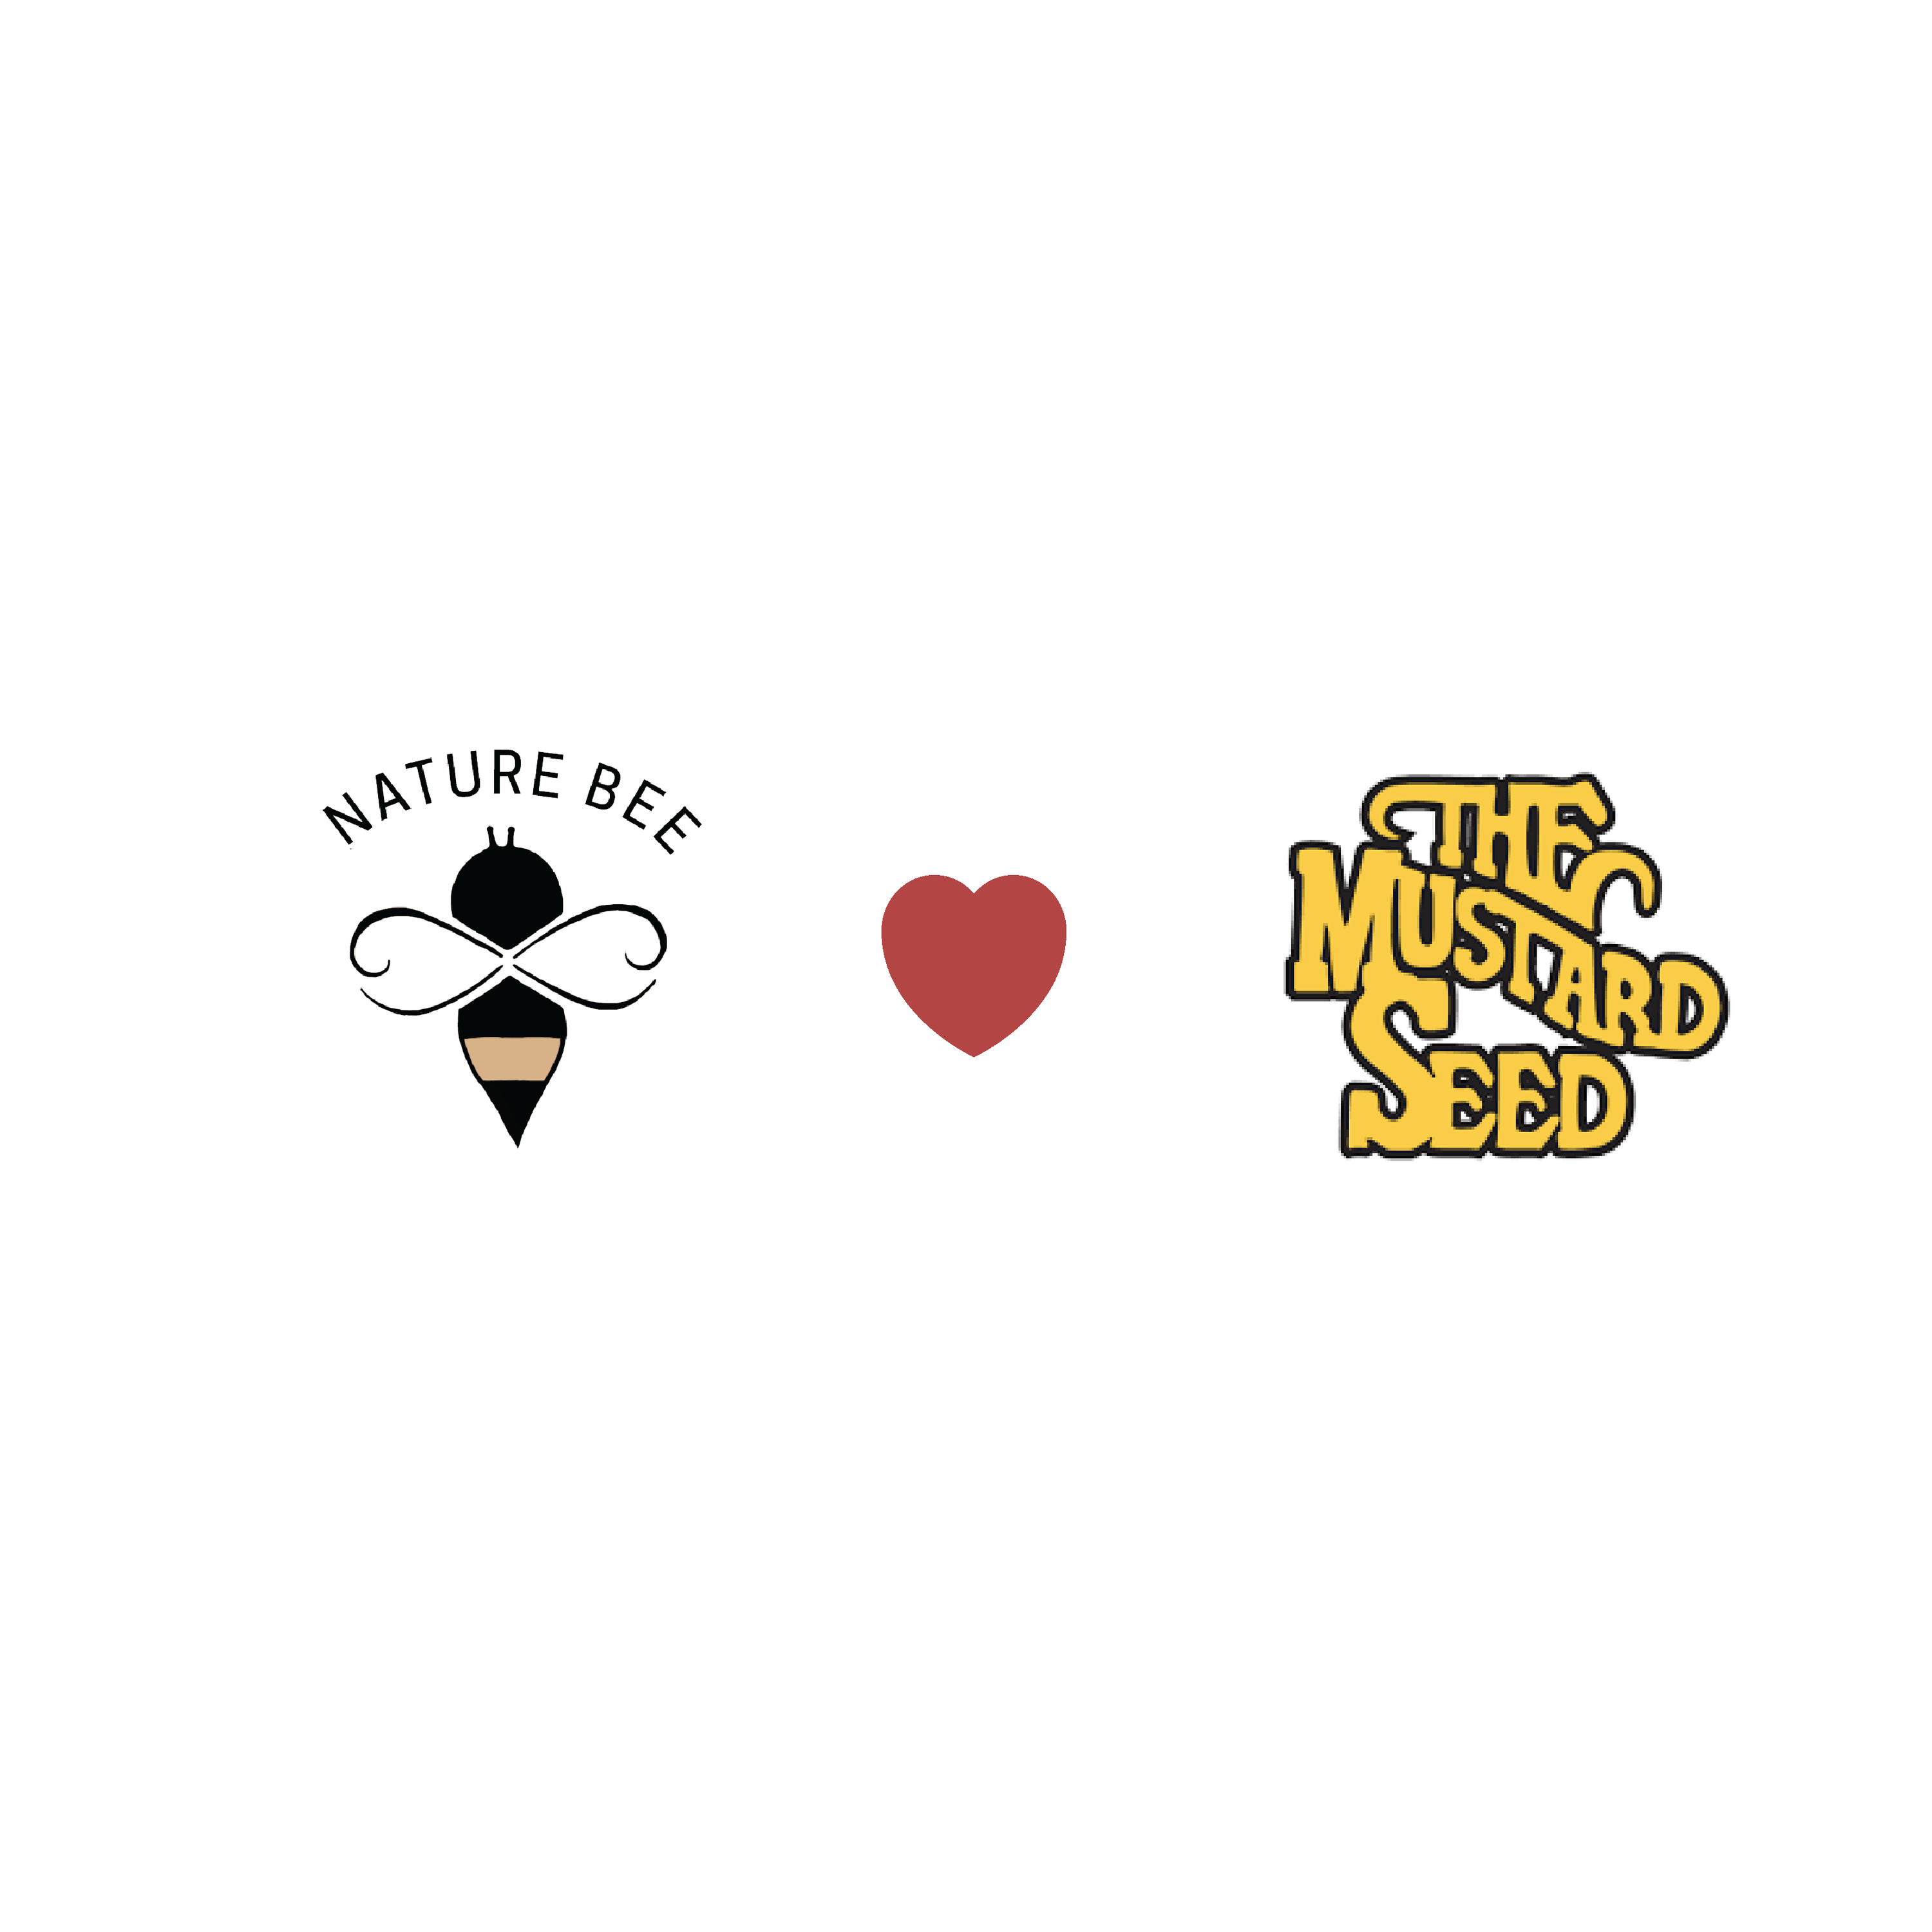 A message from Nature Bee